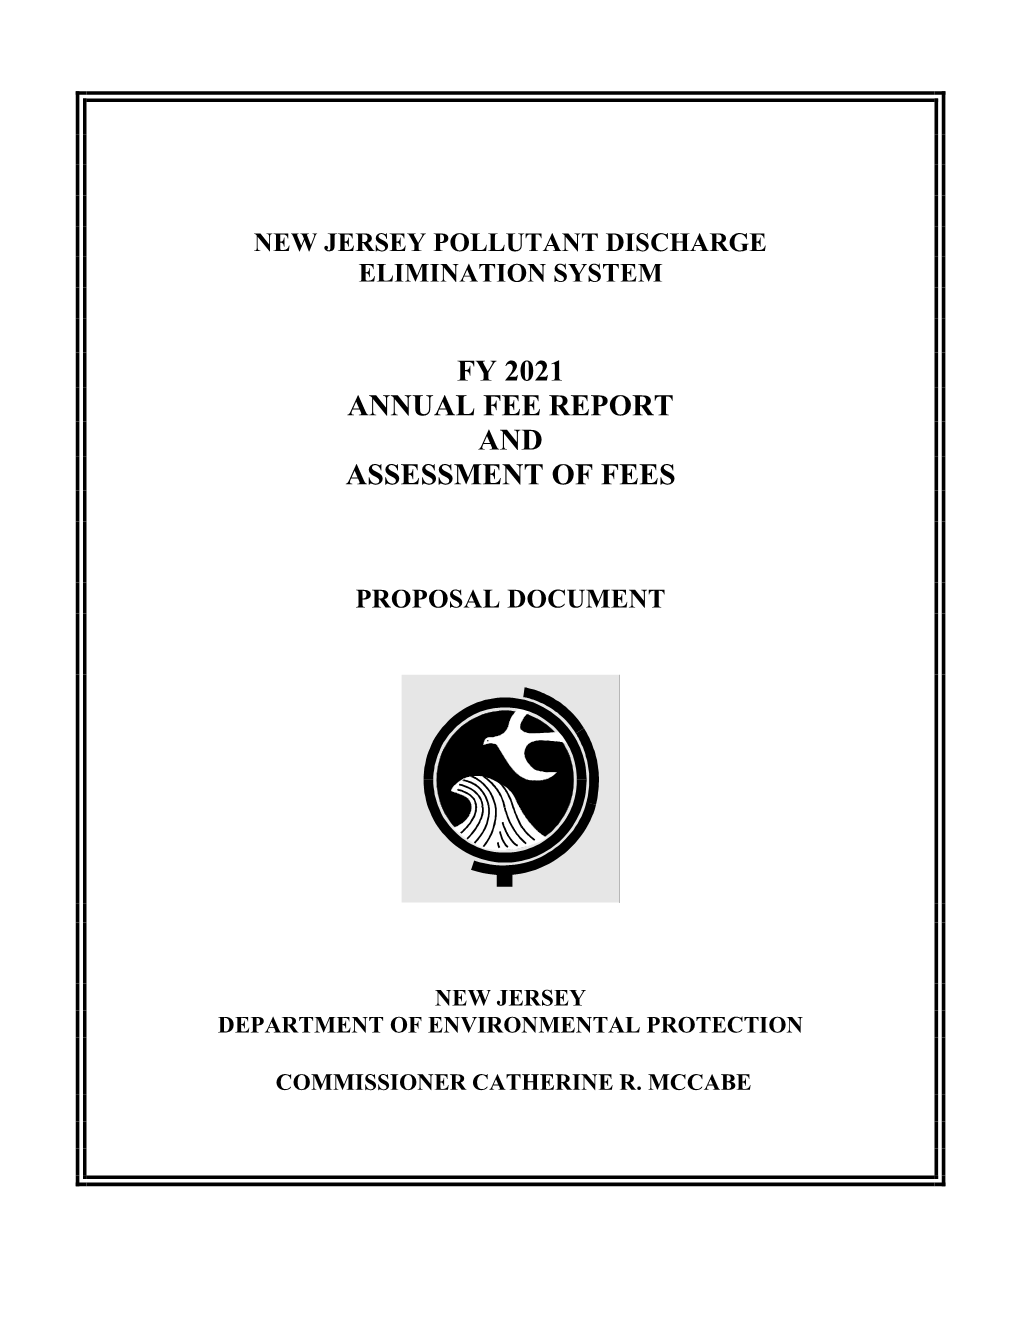 Fy 2021 Annual Fee Report and Assessment of Fees